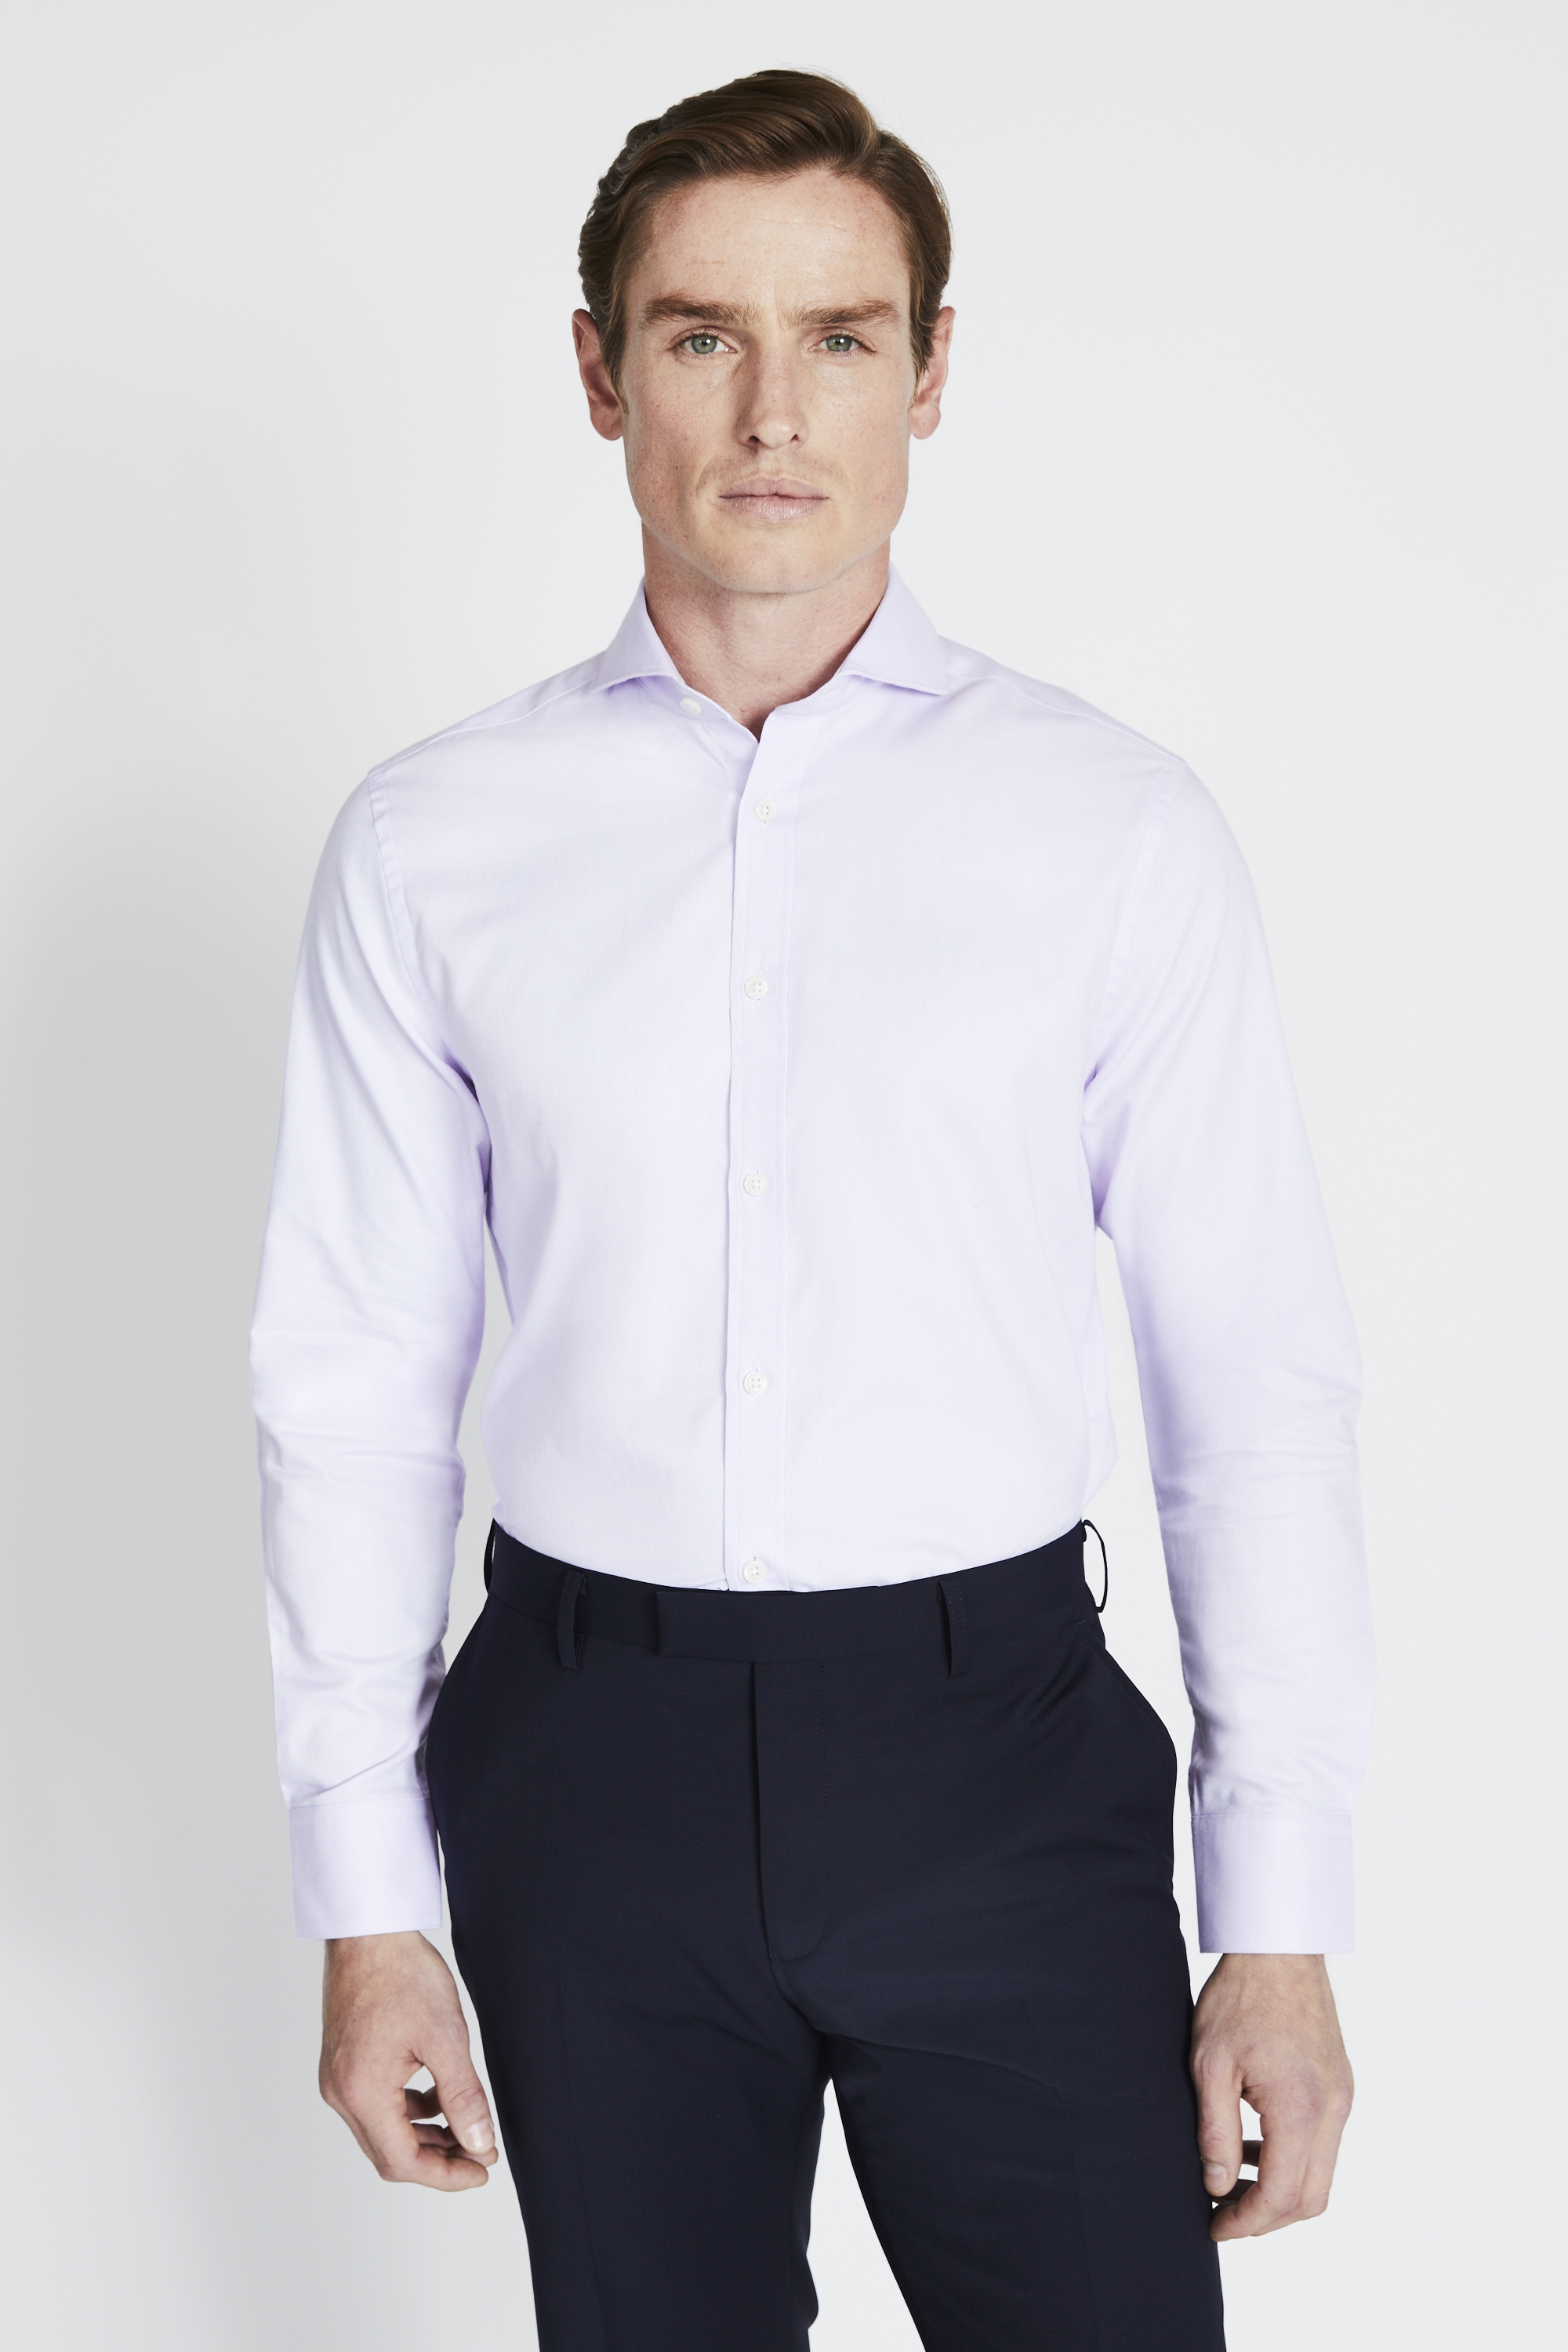 Tailored Fit Lilac Oxford Shirt | Buy Online at Moss